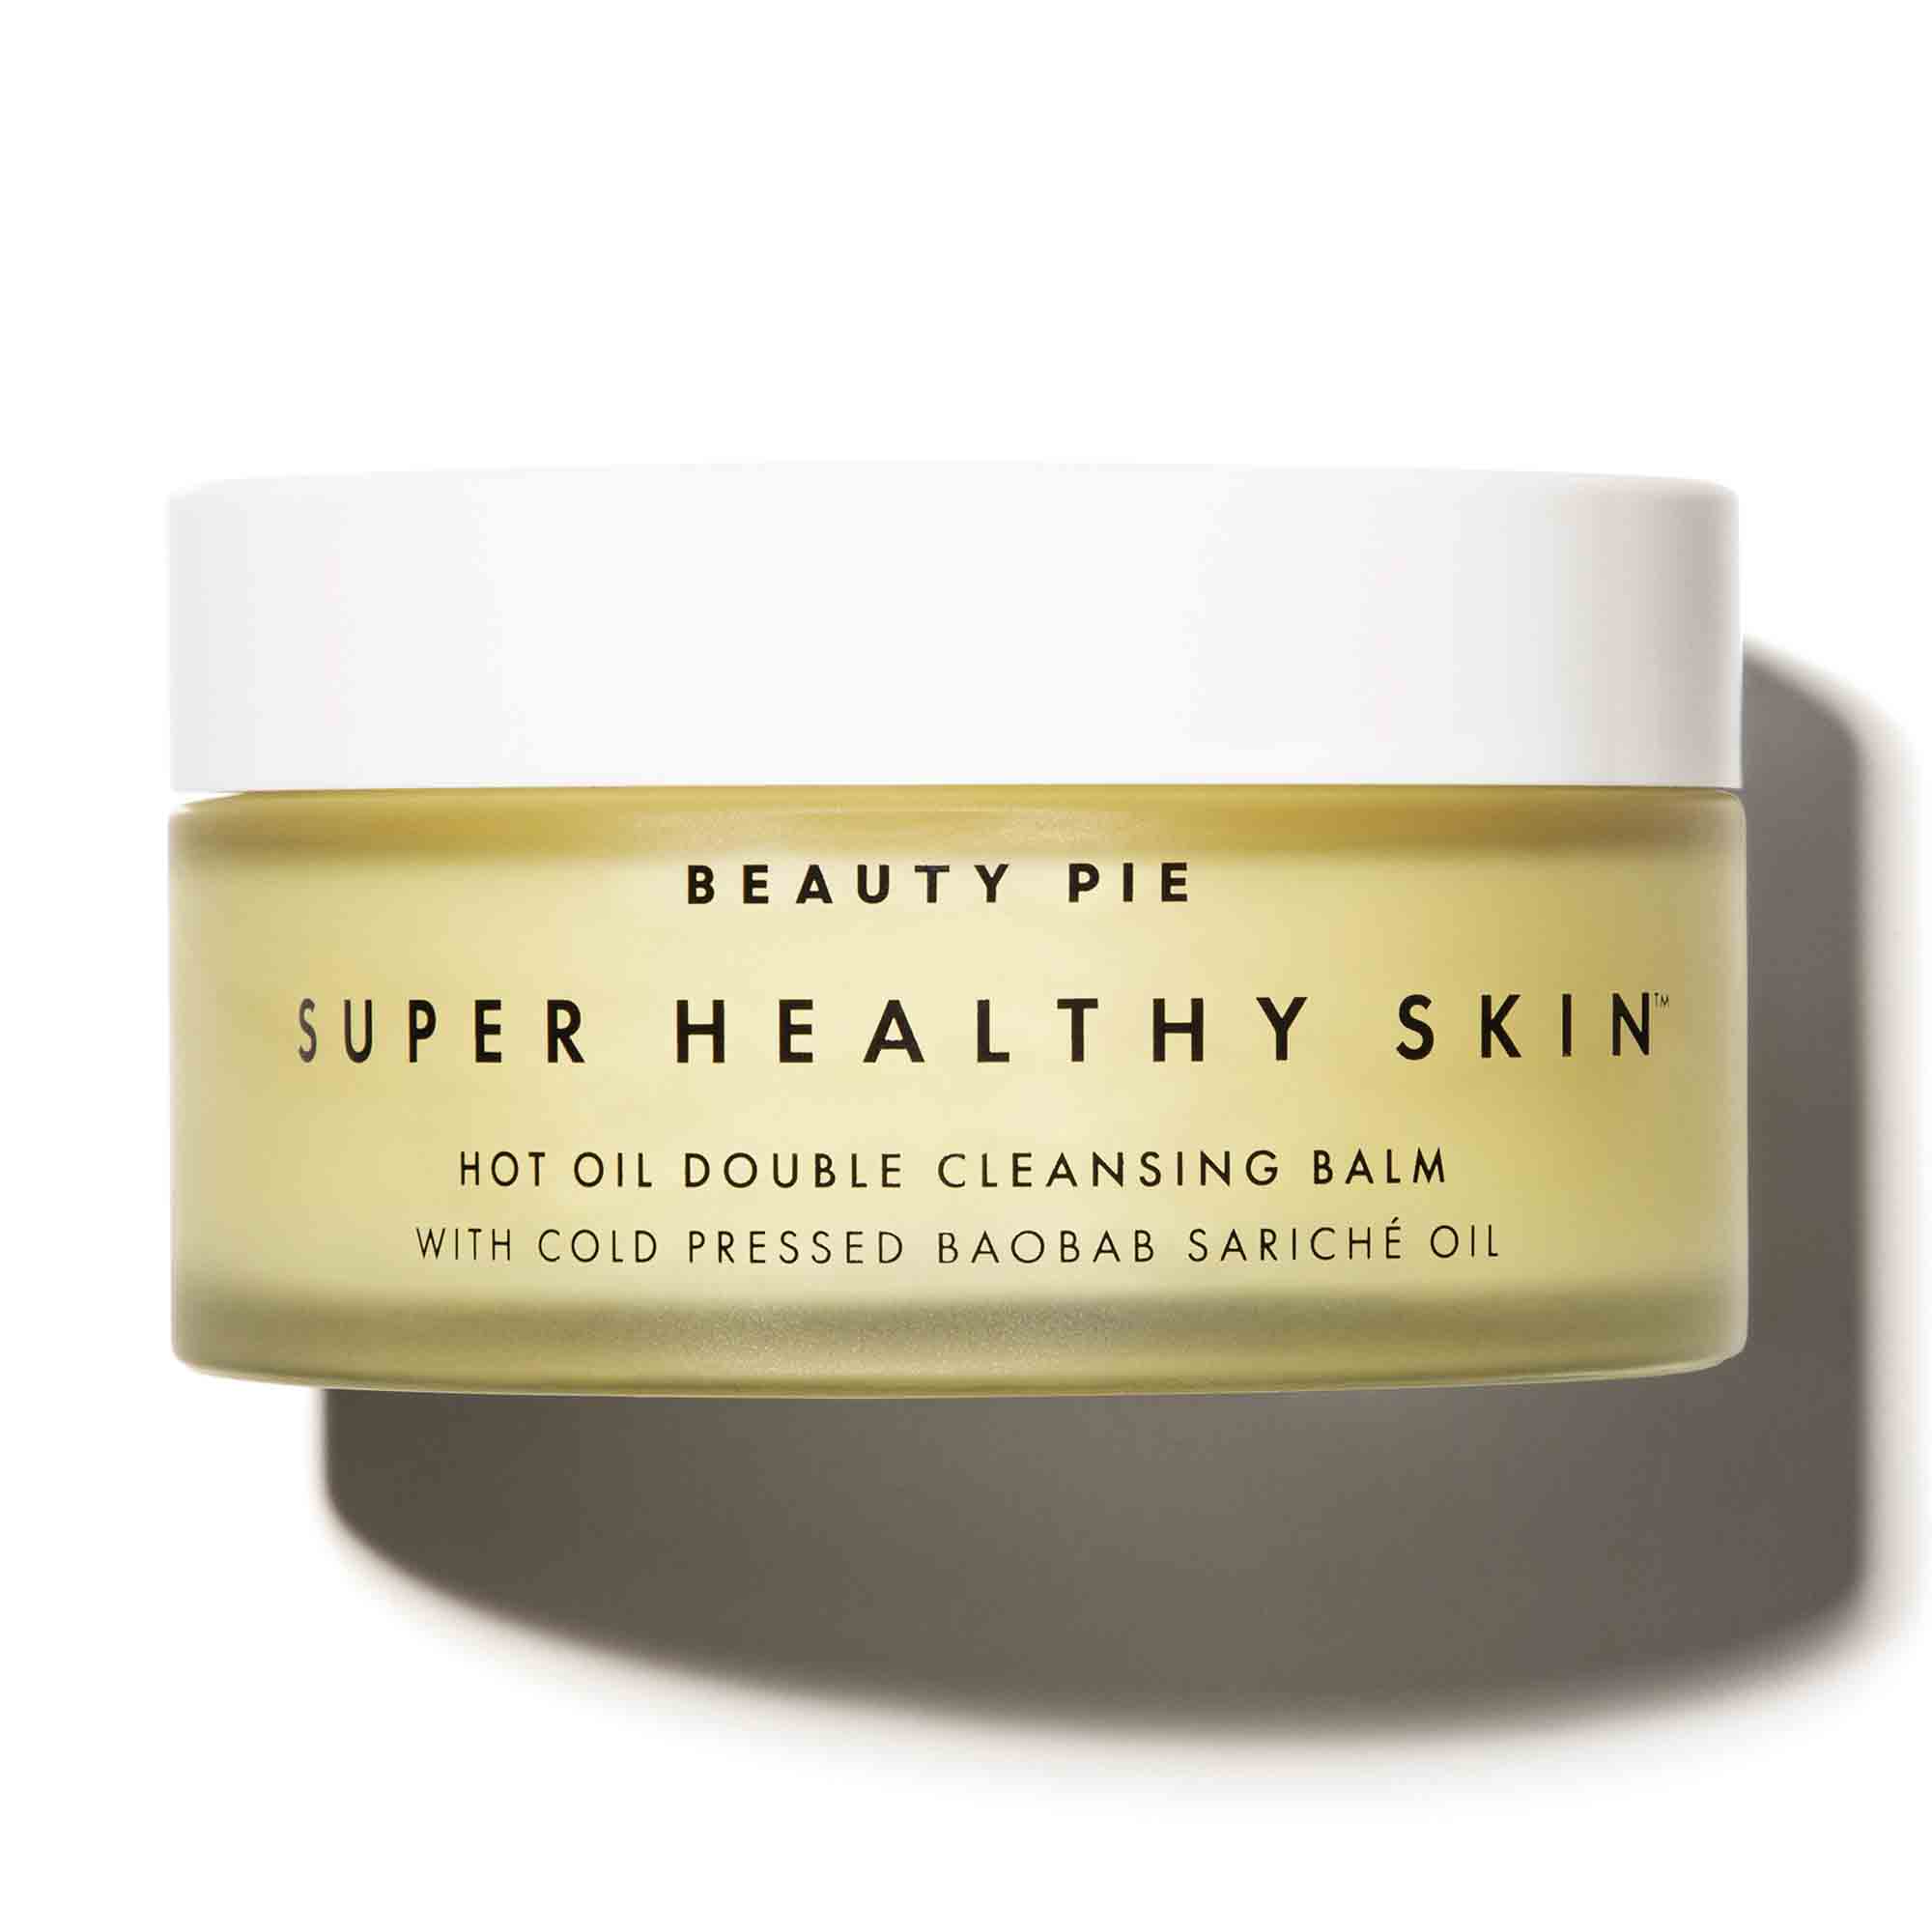 Beauty Pie - Super Healthy Skin™ Hot Oil Double Cleansing Balm